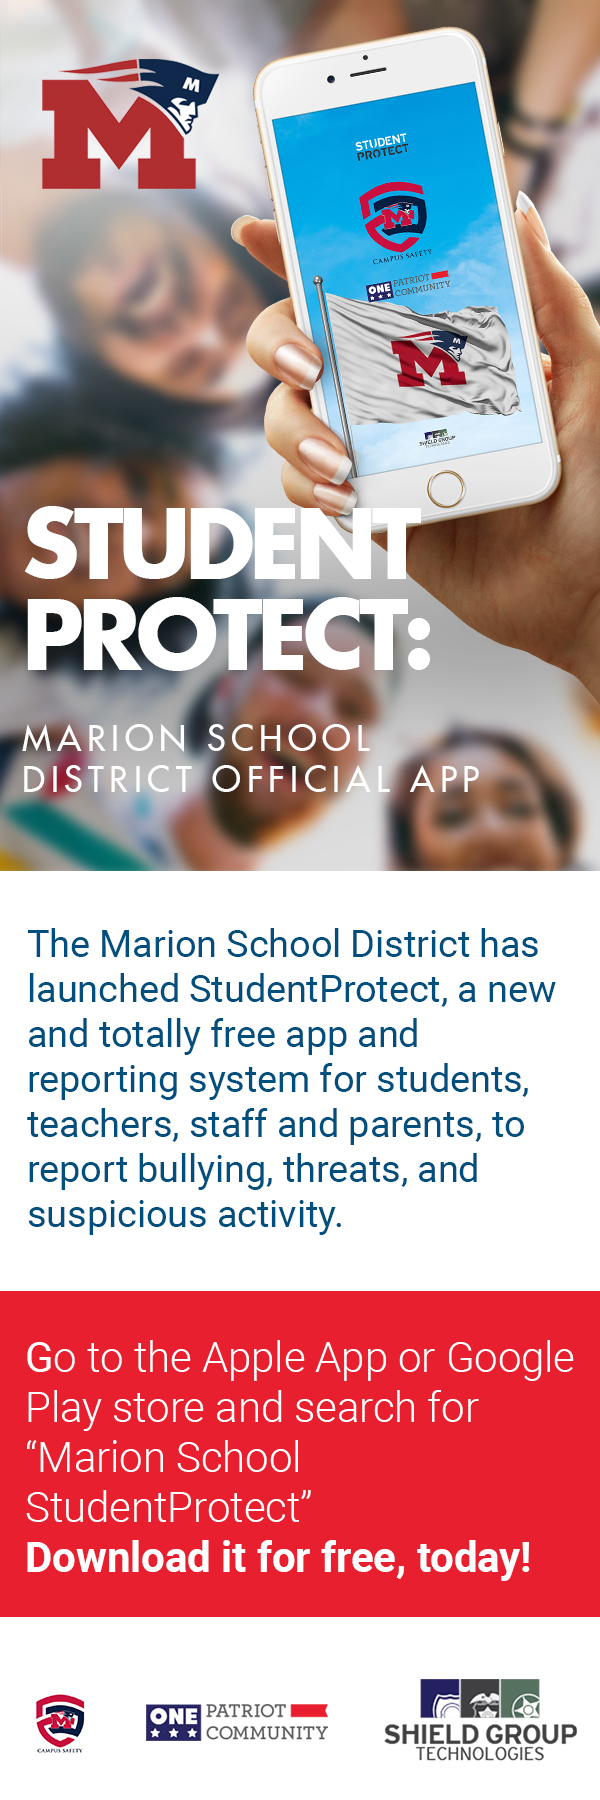 STUDENT PROTECT INFO